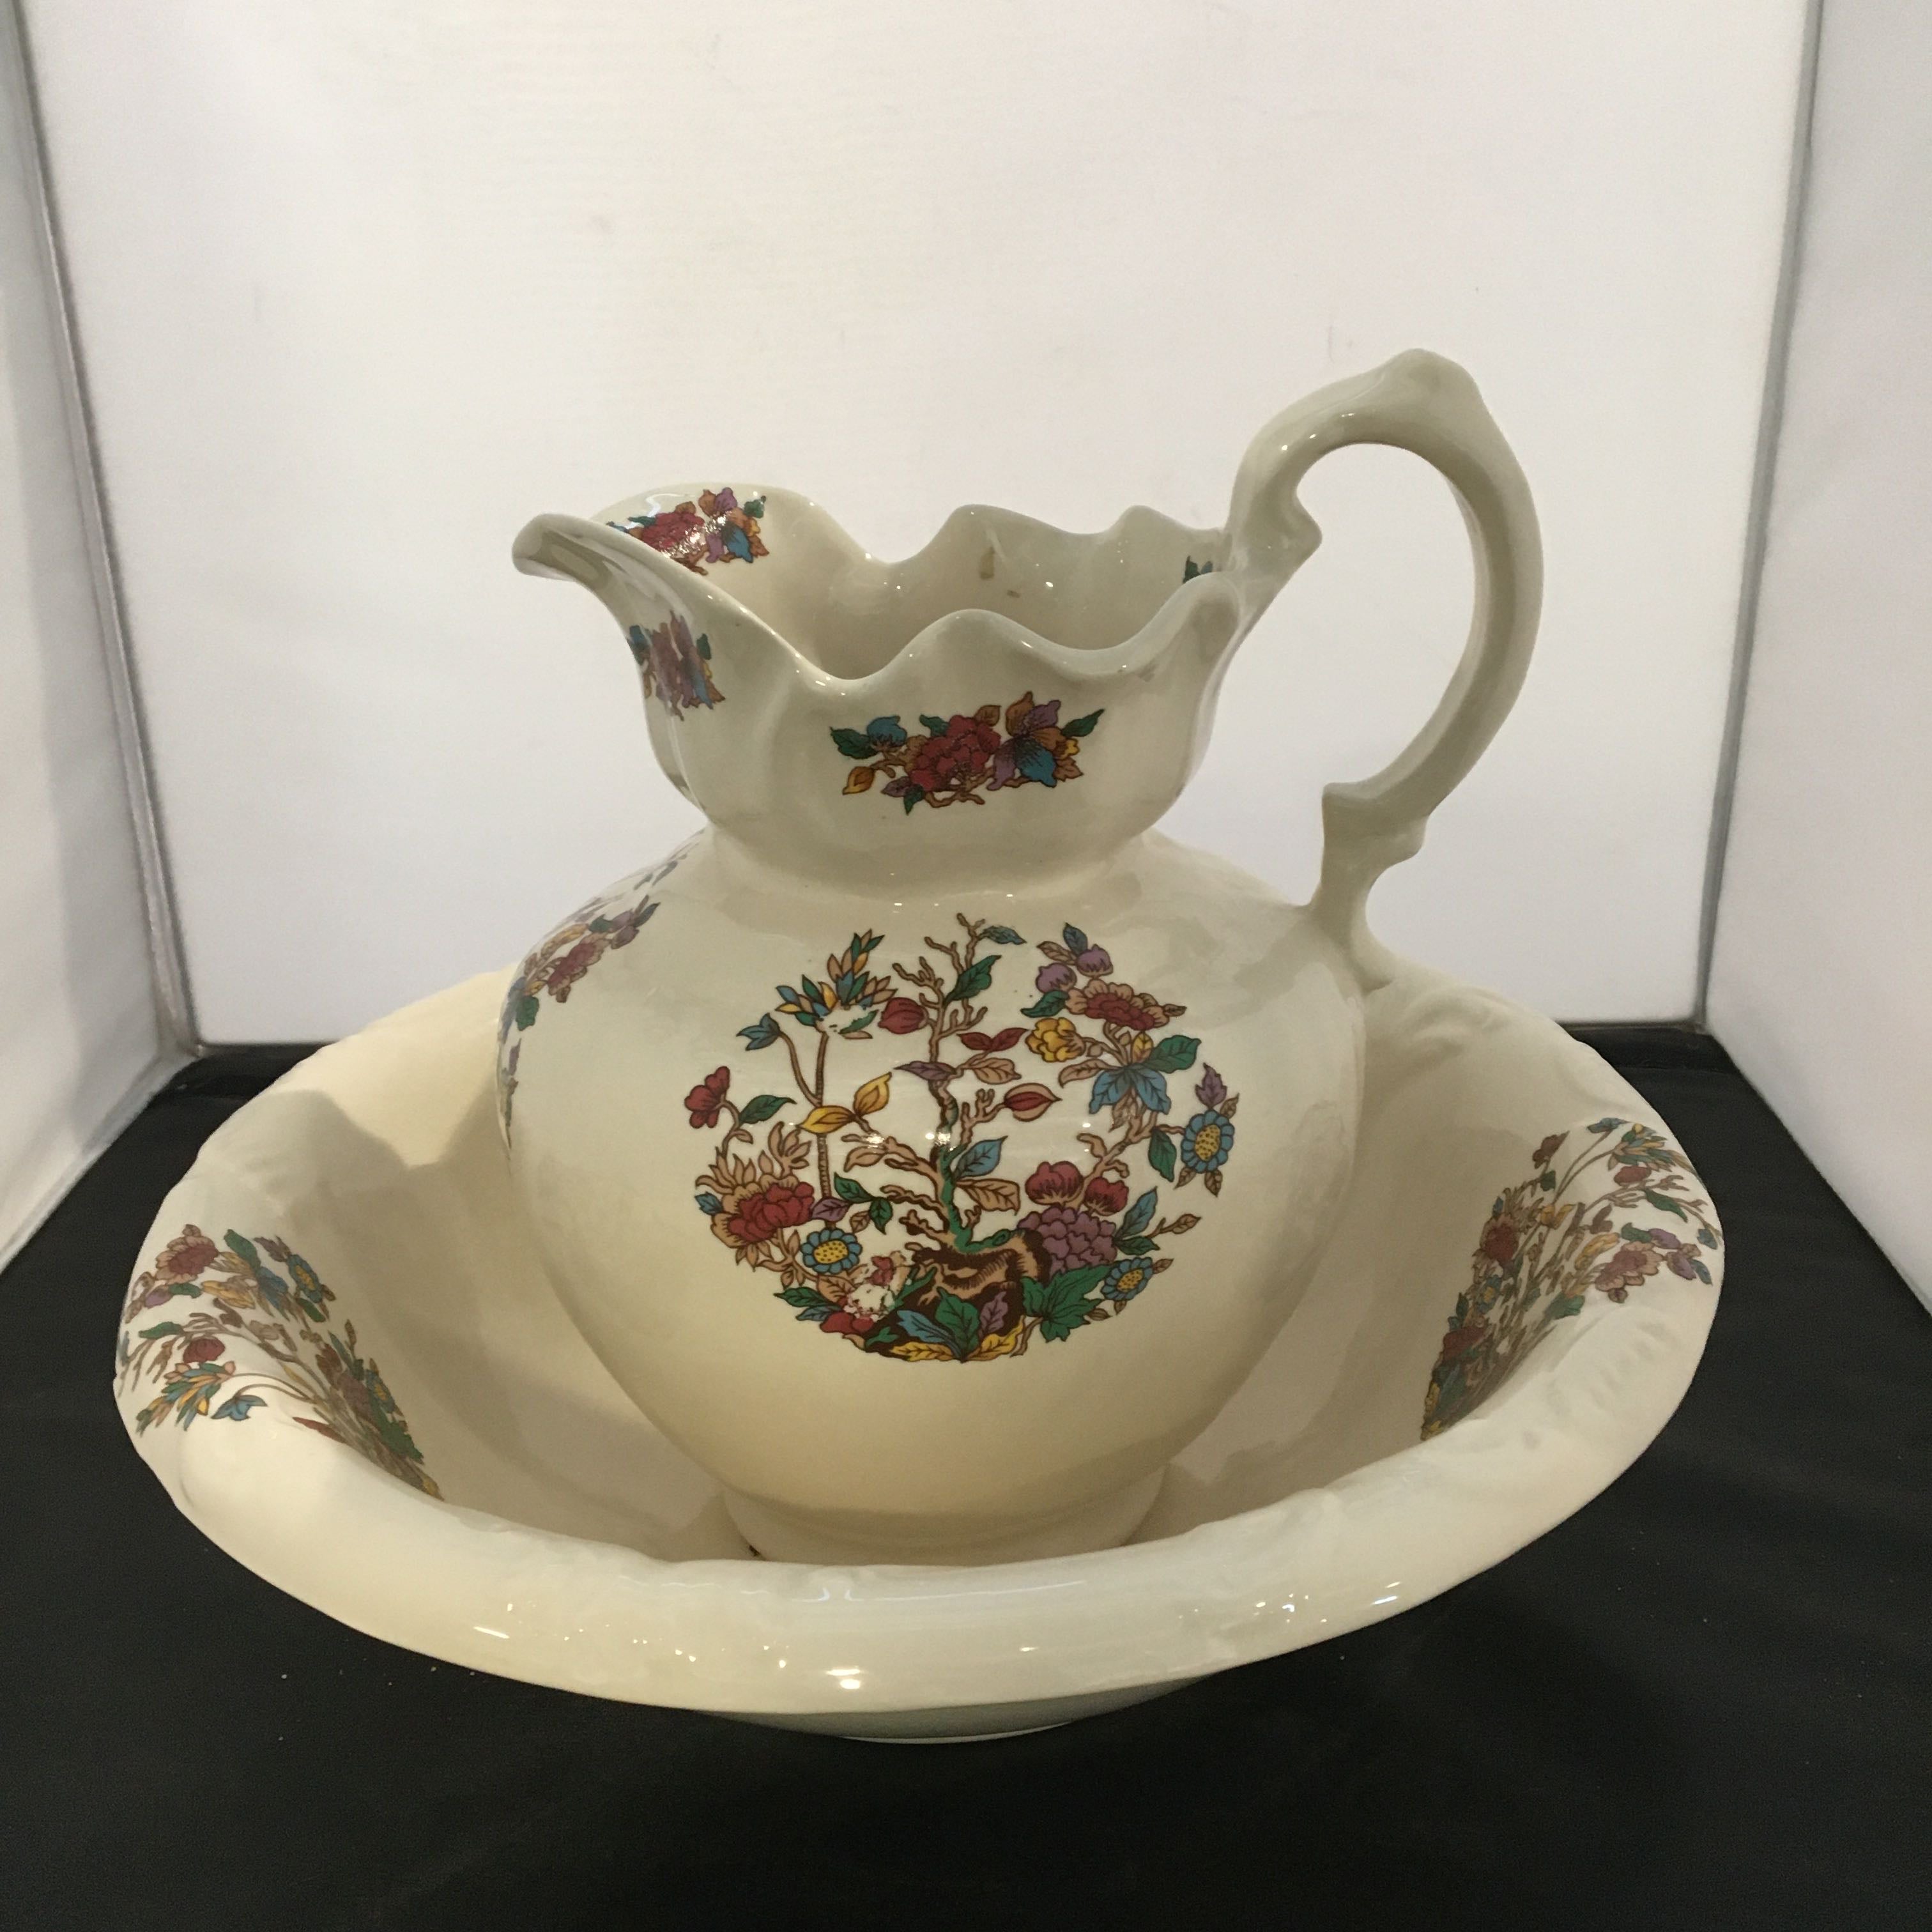 Antique Ironstone Pitcher with Water Basin Made in England